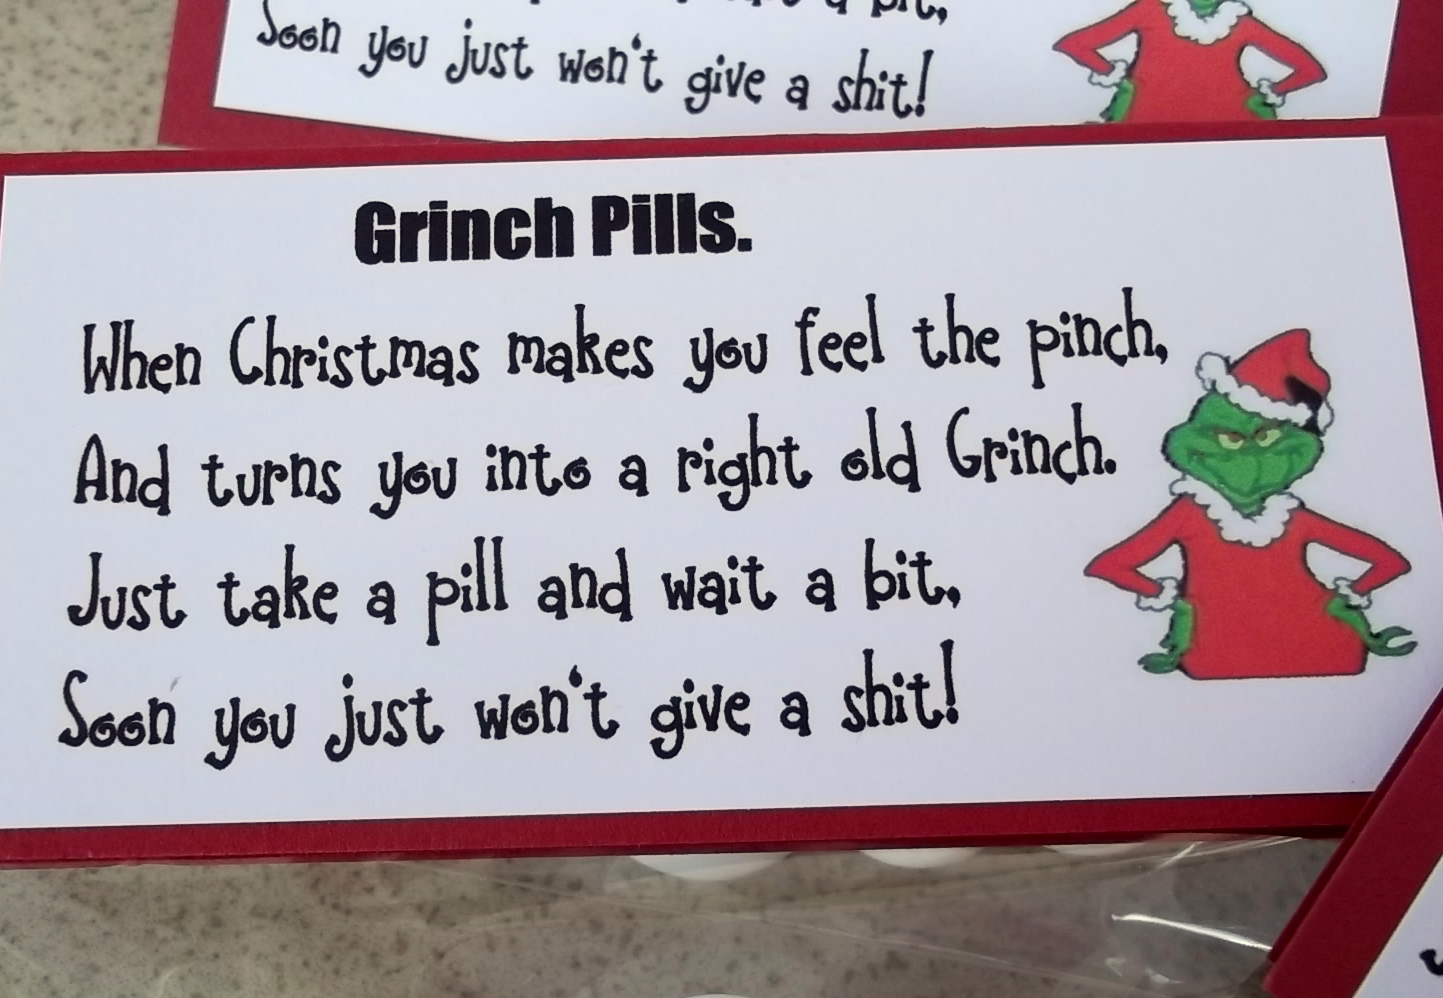 on-the-cards-grinch-pills-for-the-grown-ups